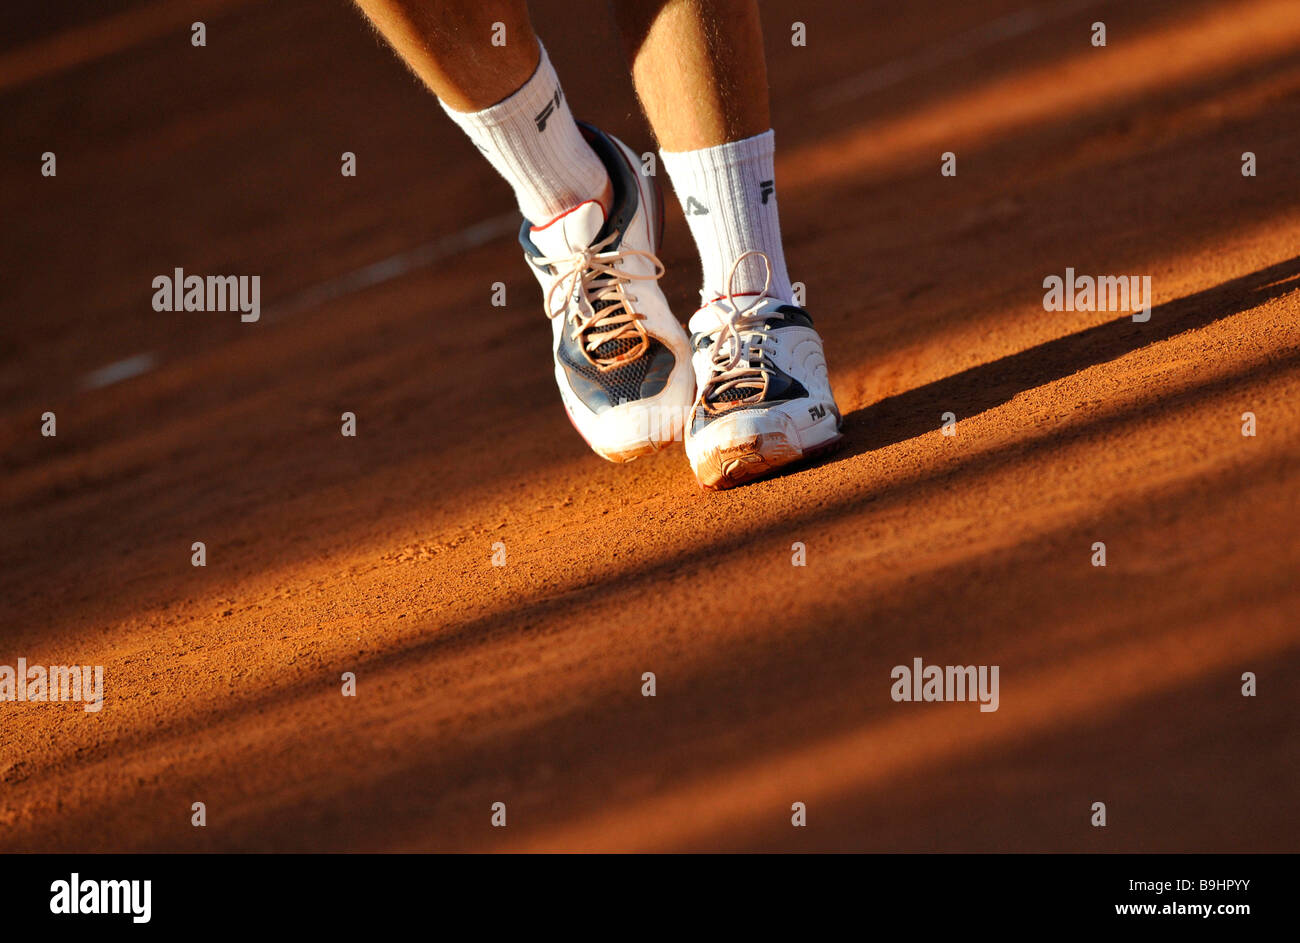 Close-up of the FILA shoes of a tennis player Stock Photo